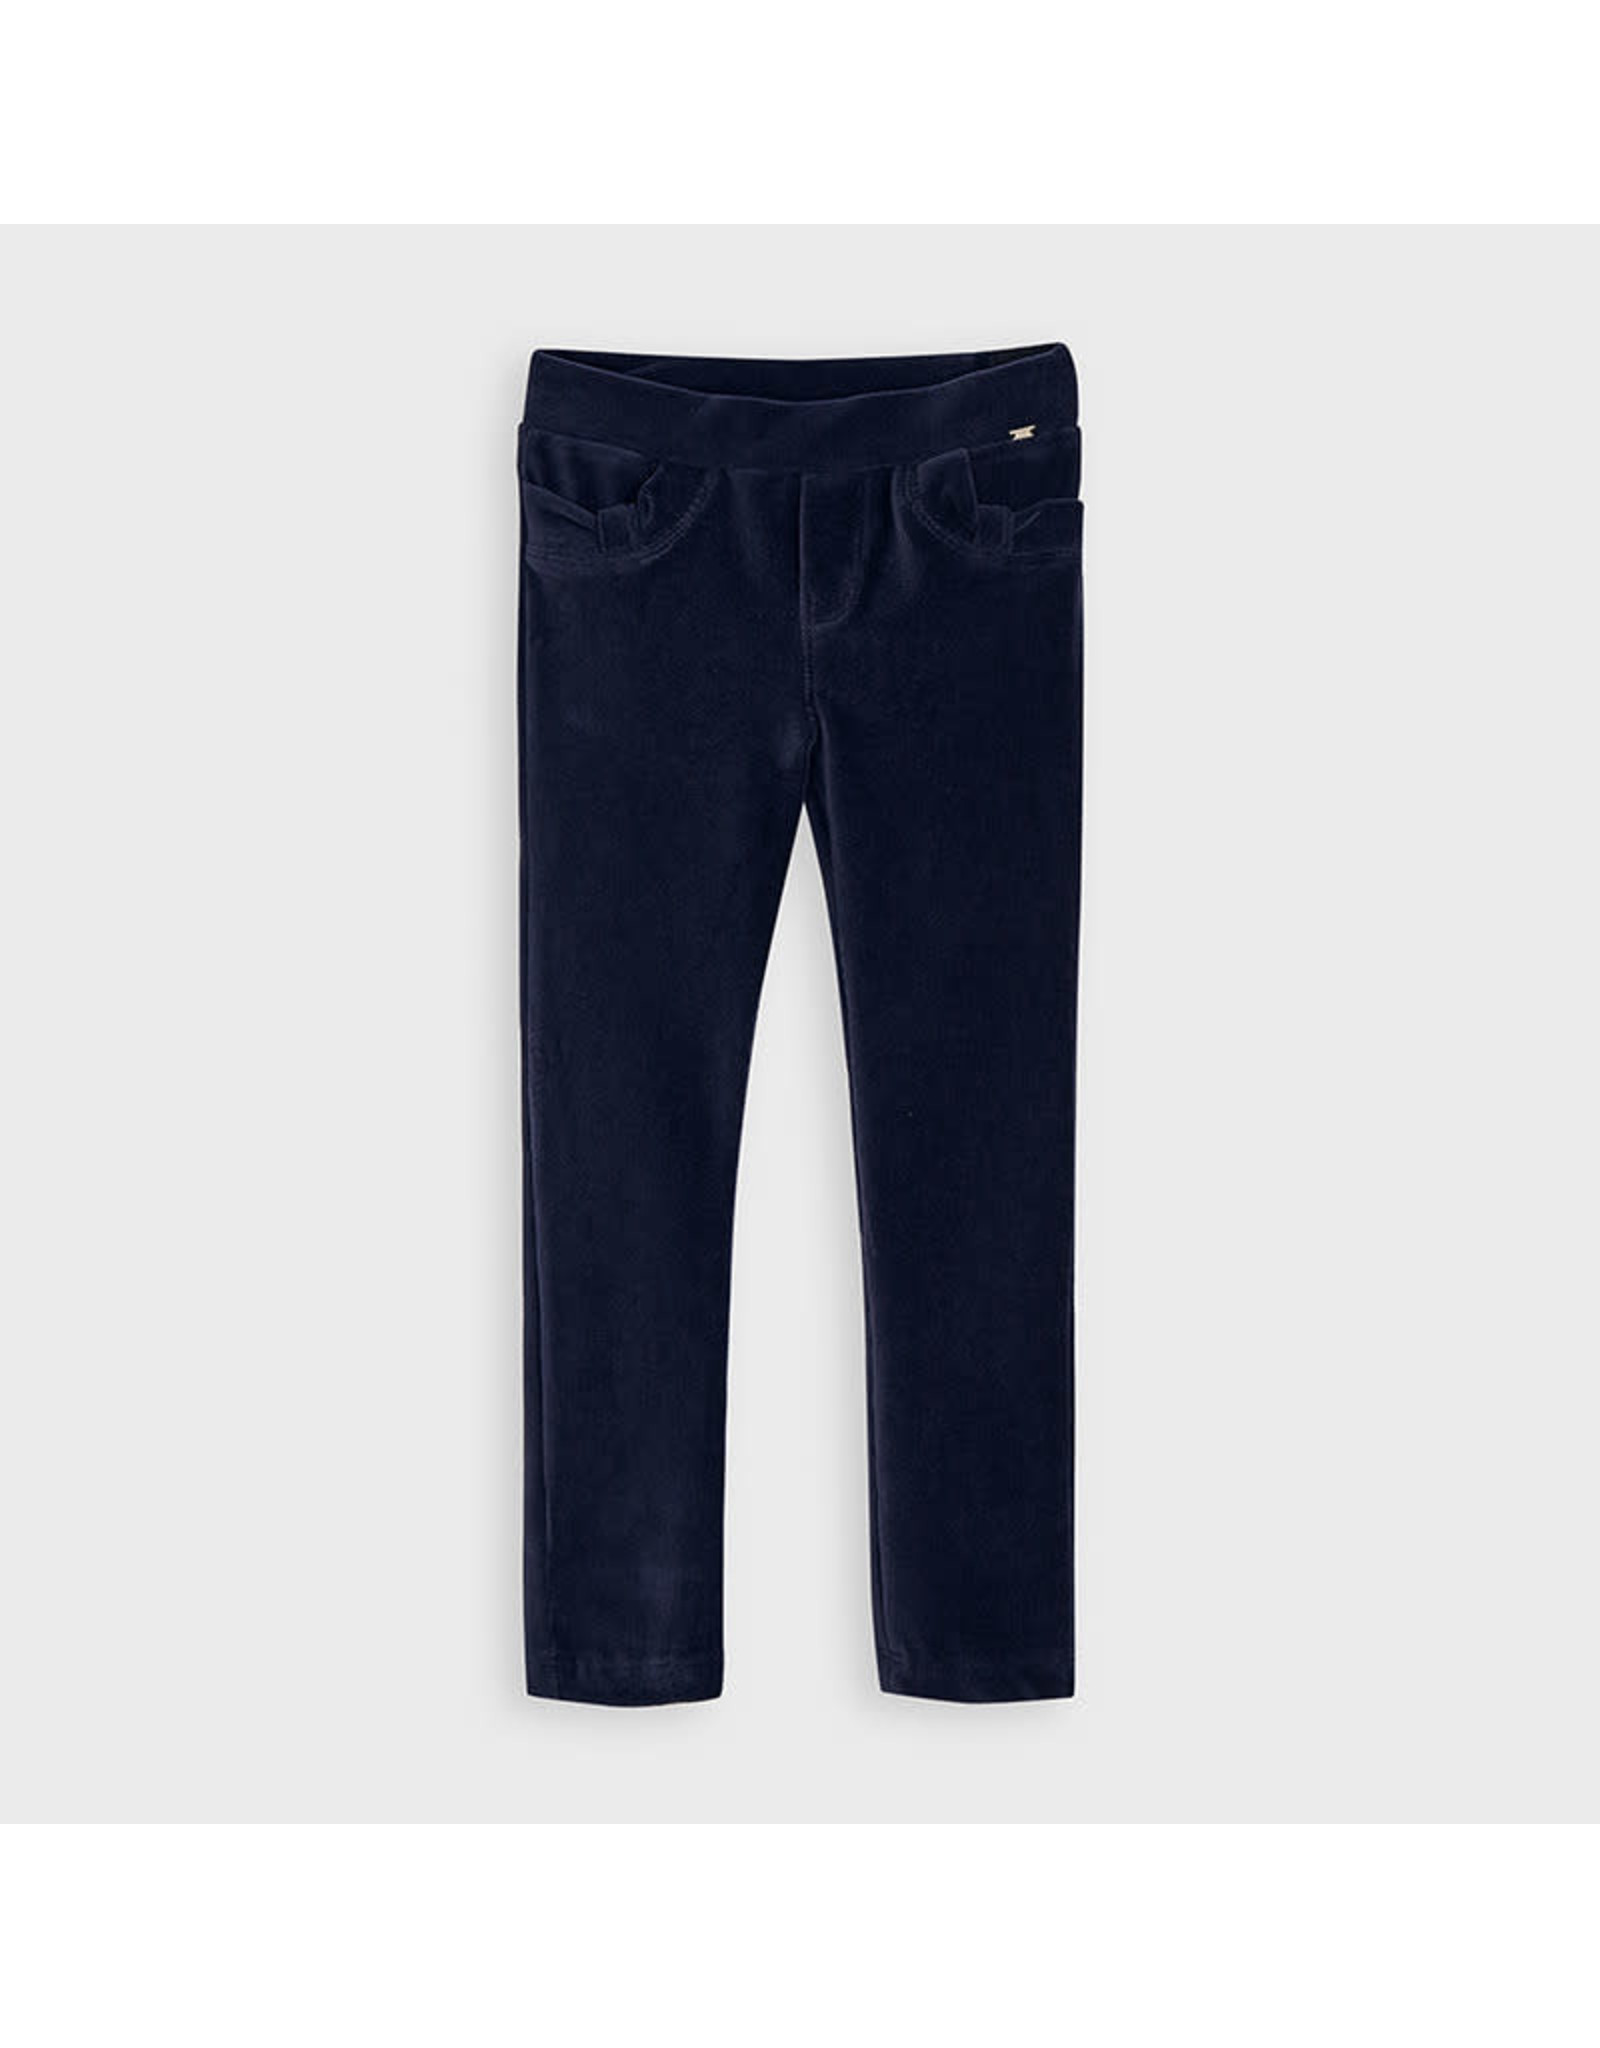 Mayoral Basic Knit Trousers in Navy